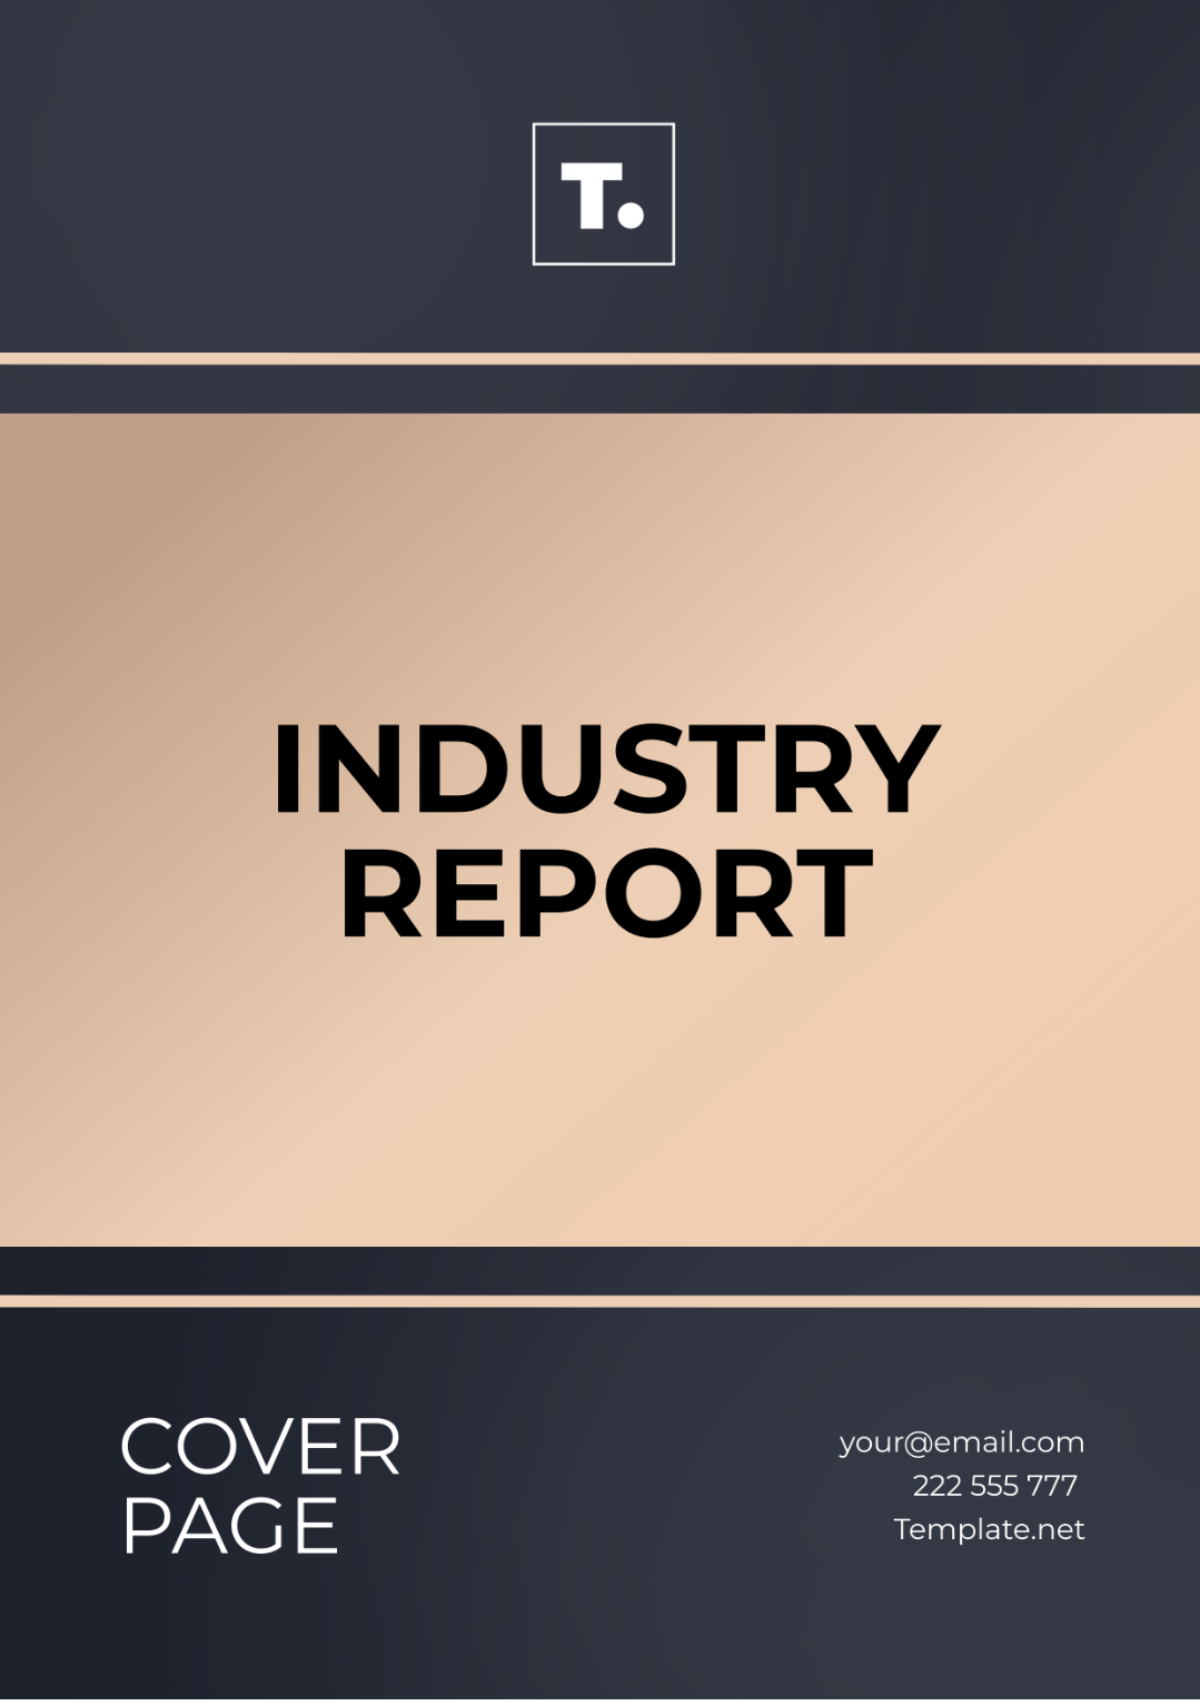 Industry Report Template